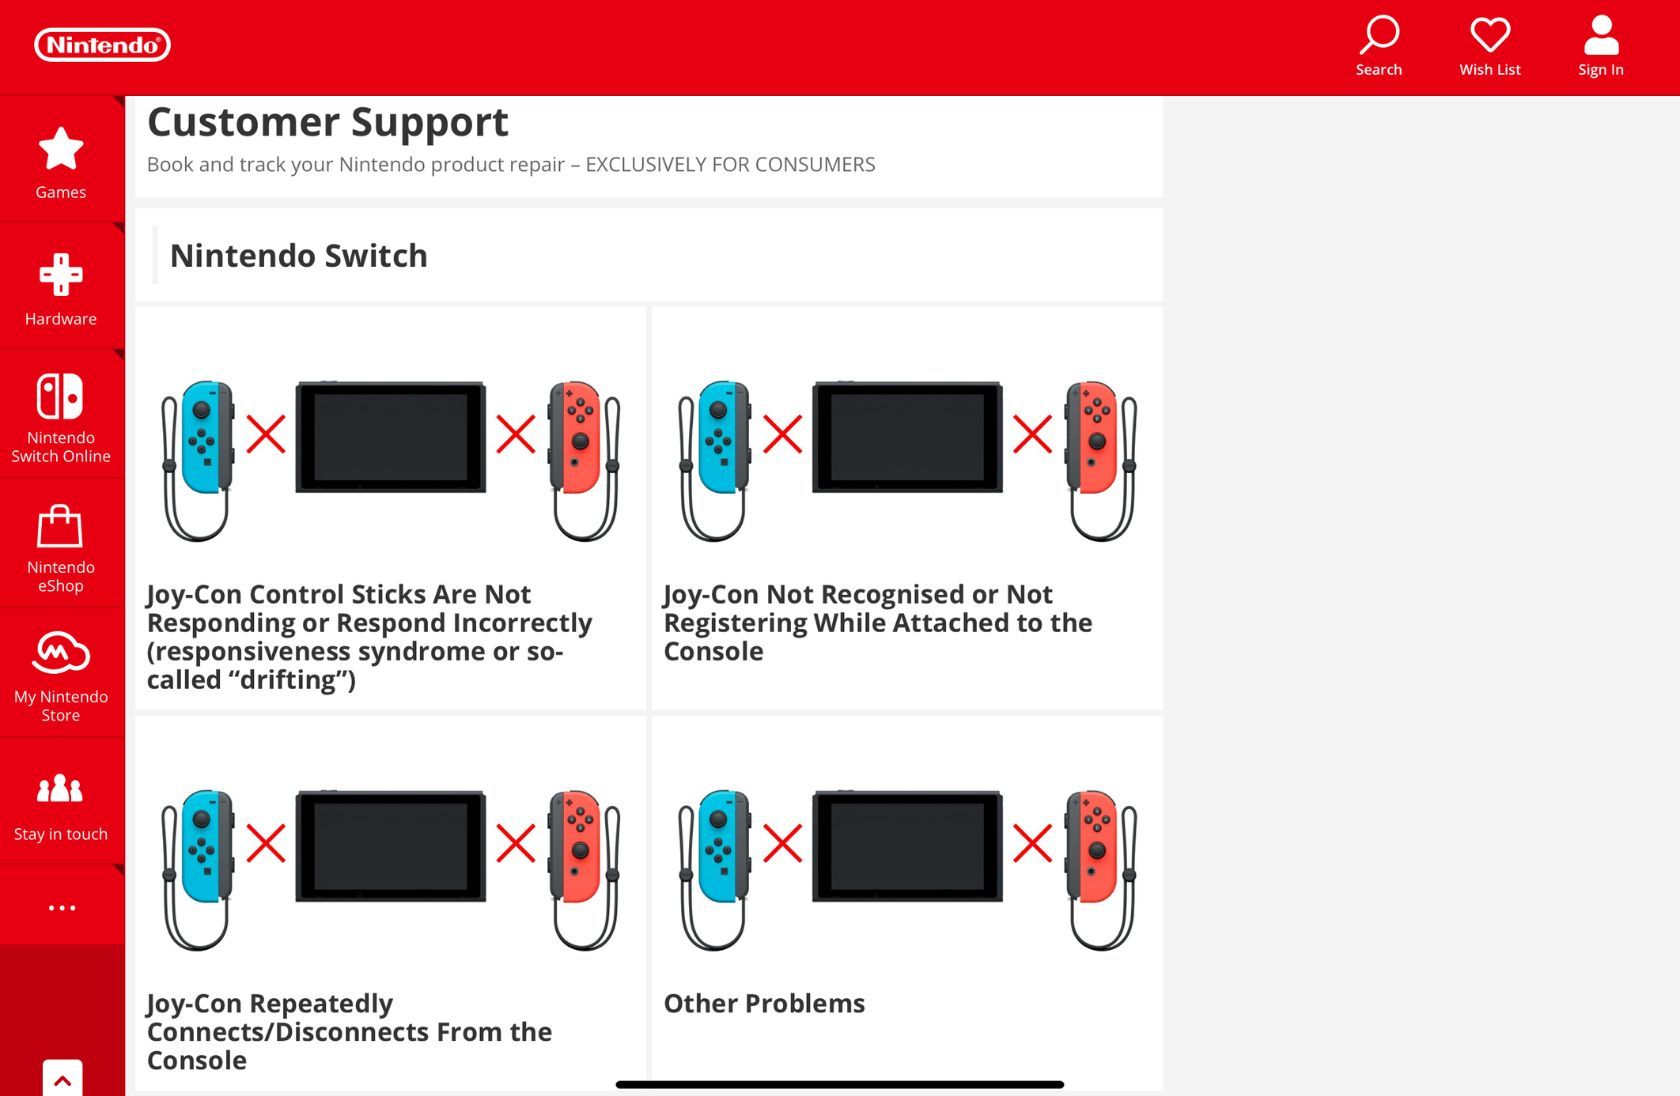 How to Send Your Joy-Cons Off for a Free Repair